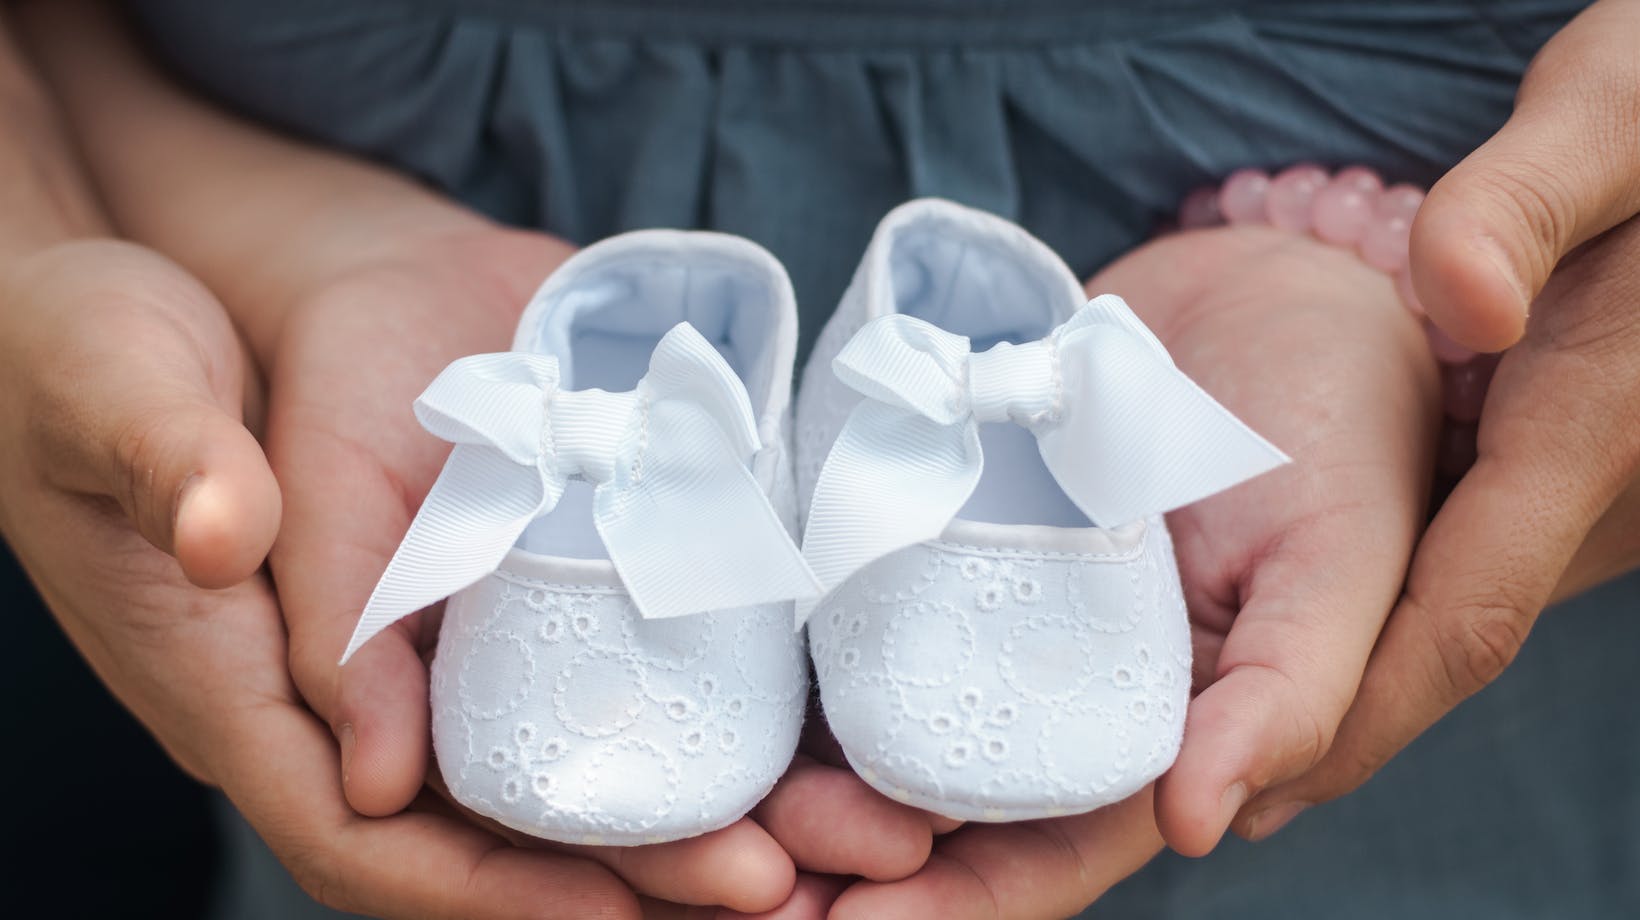 Thoughtful Gifts: Gift Ideas for Big Sister When Baby is Born